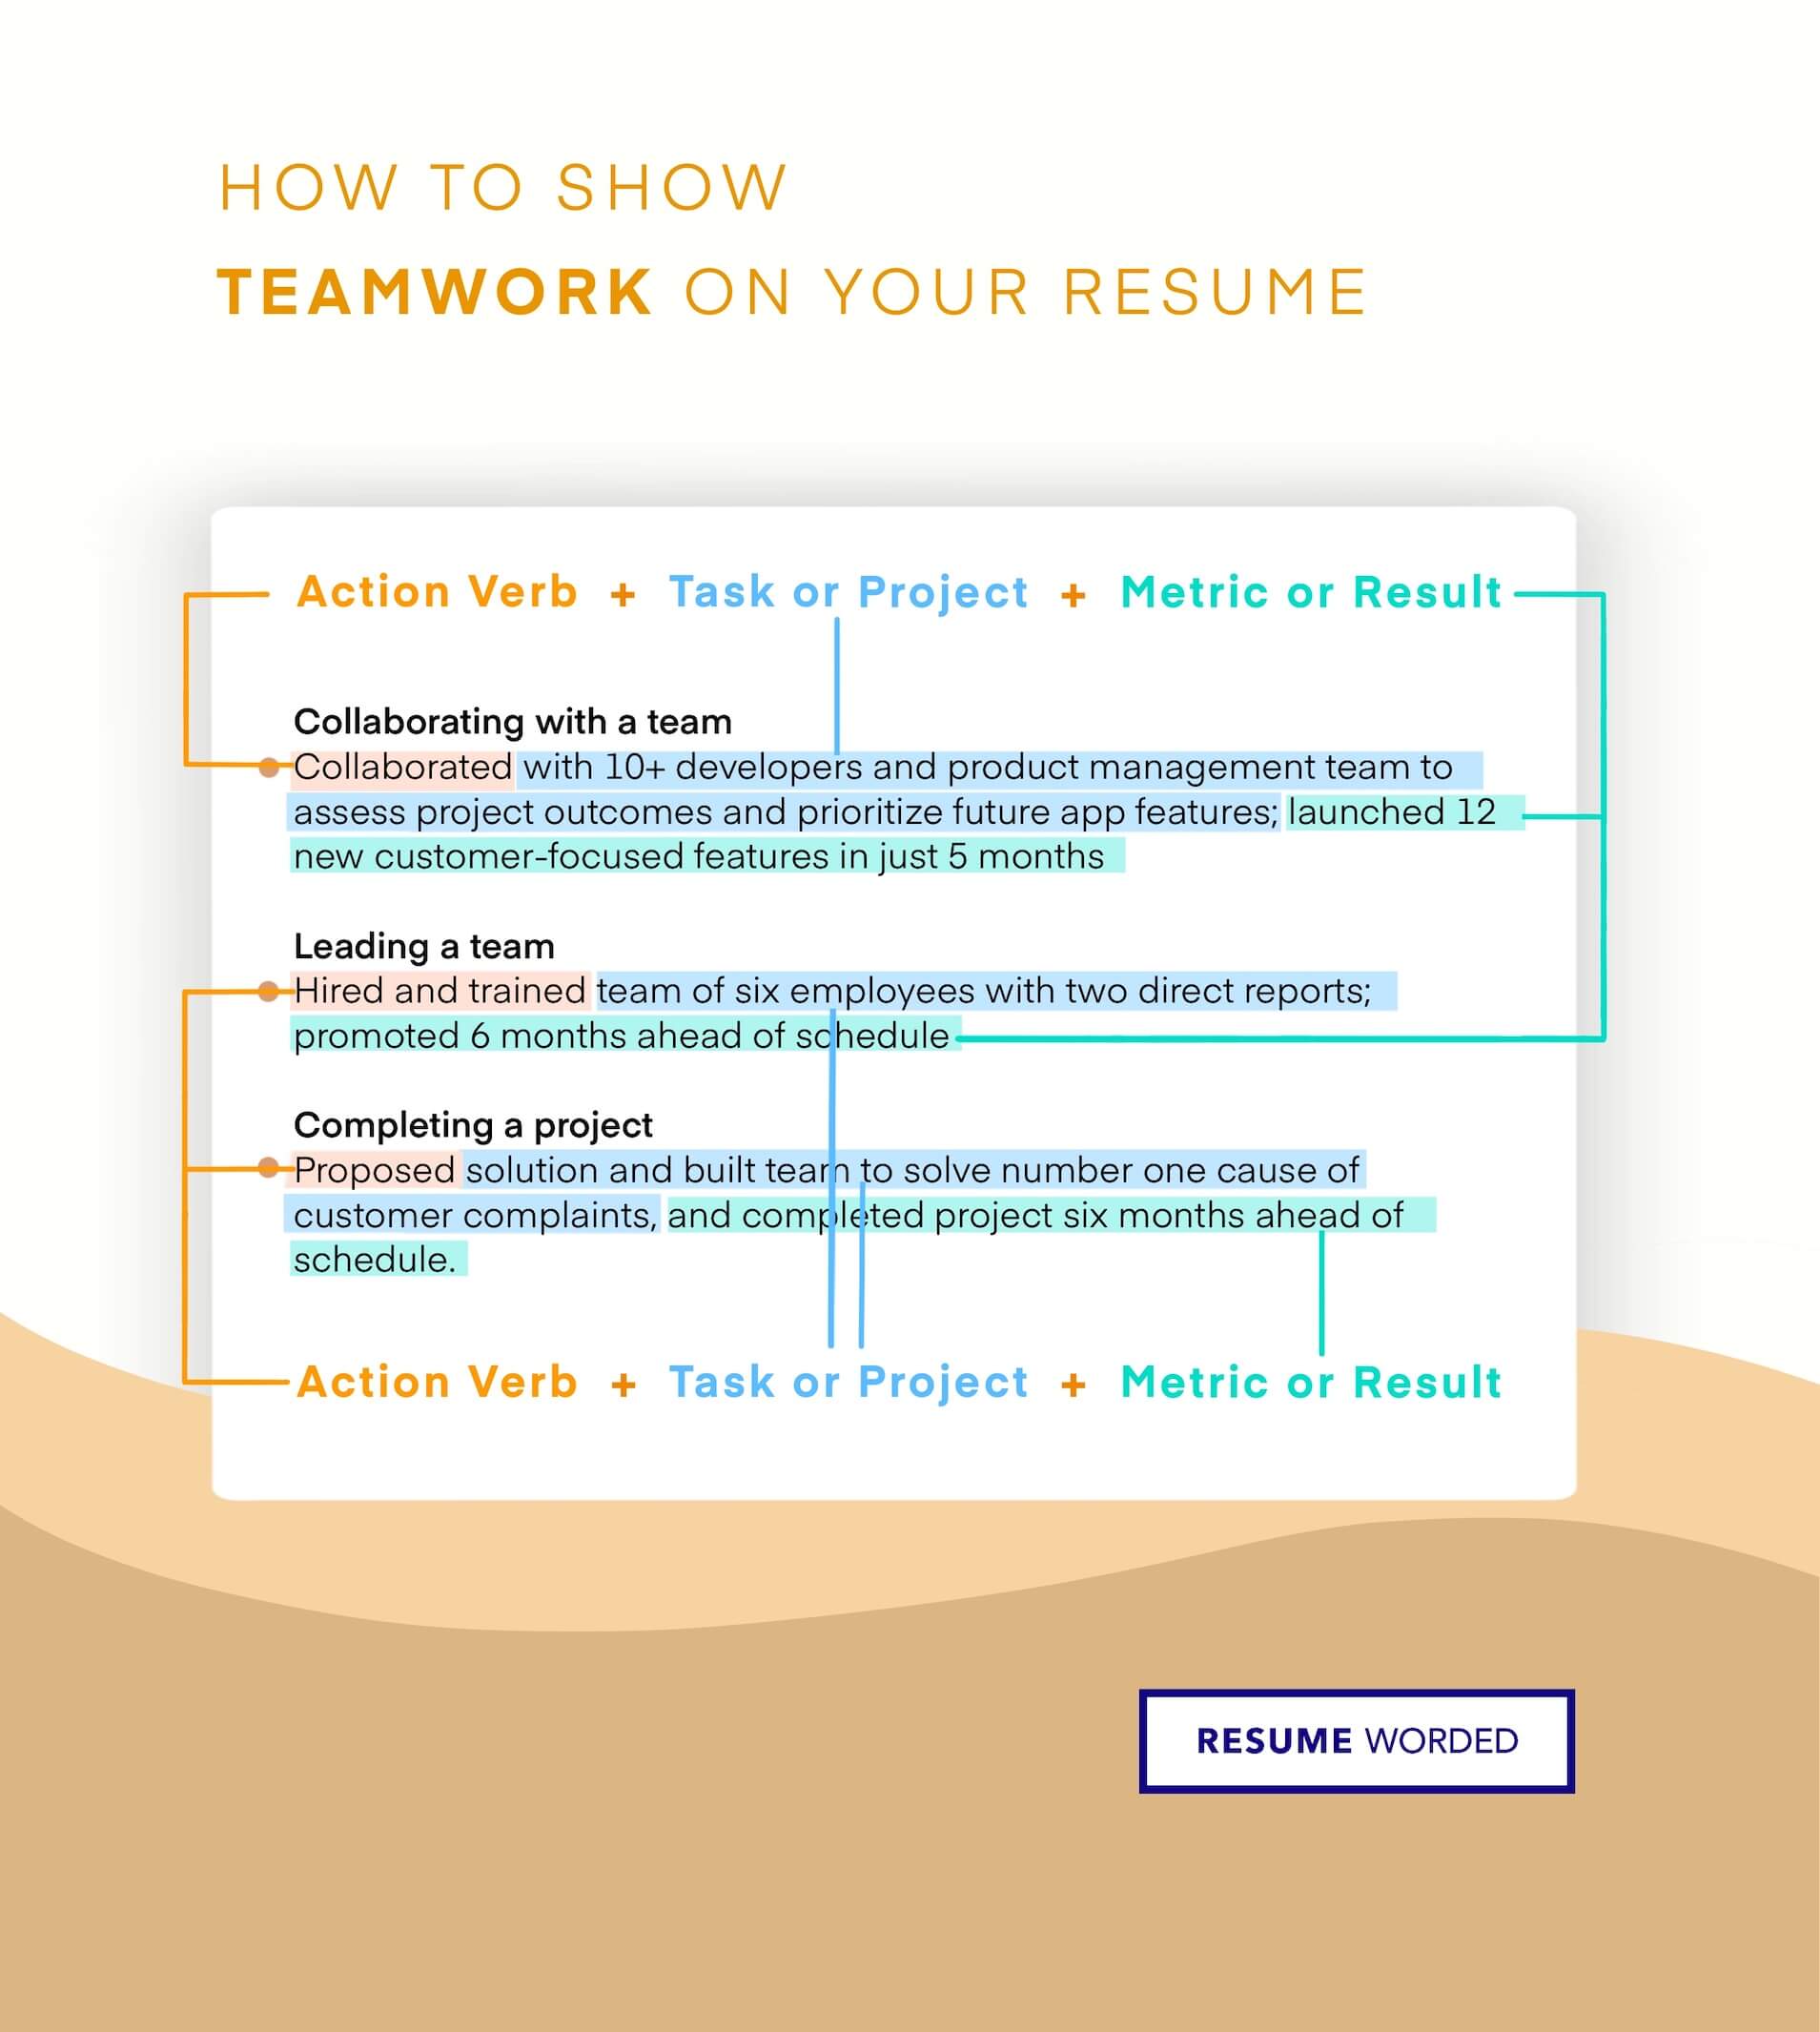 Showcase your ability to manage remote teams. - Cloud DevOps Engineer Resume